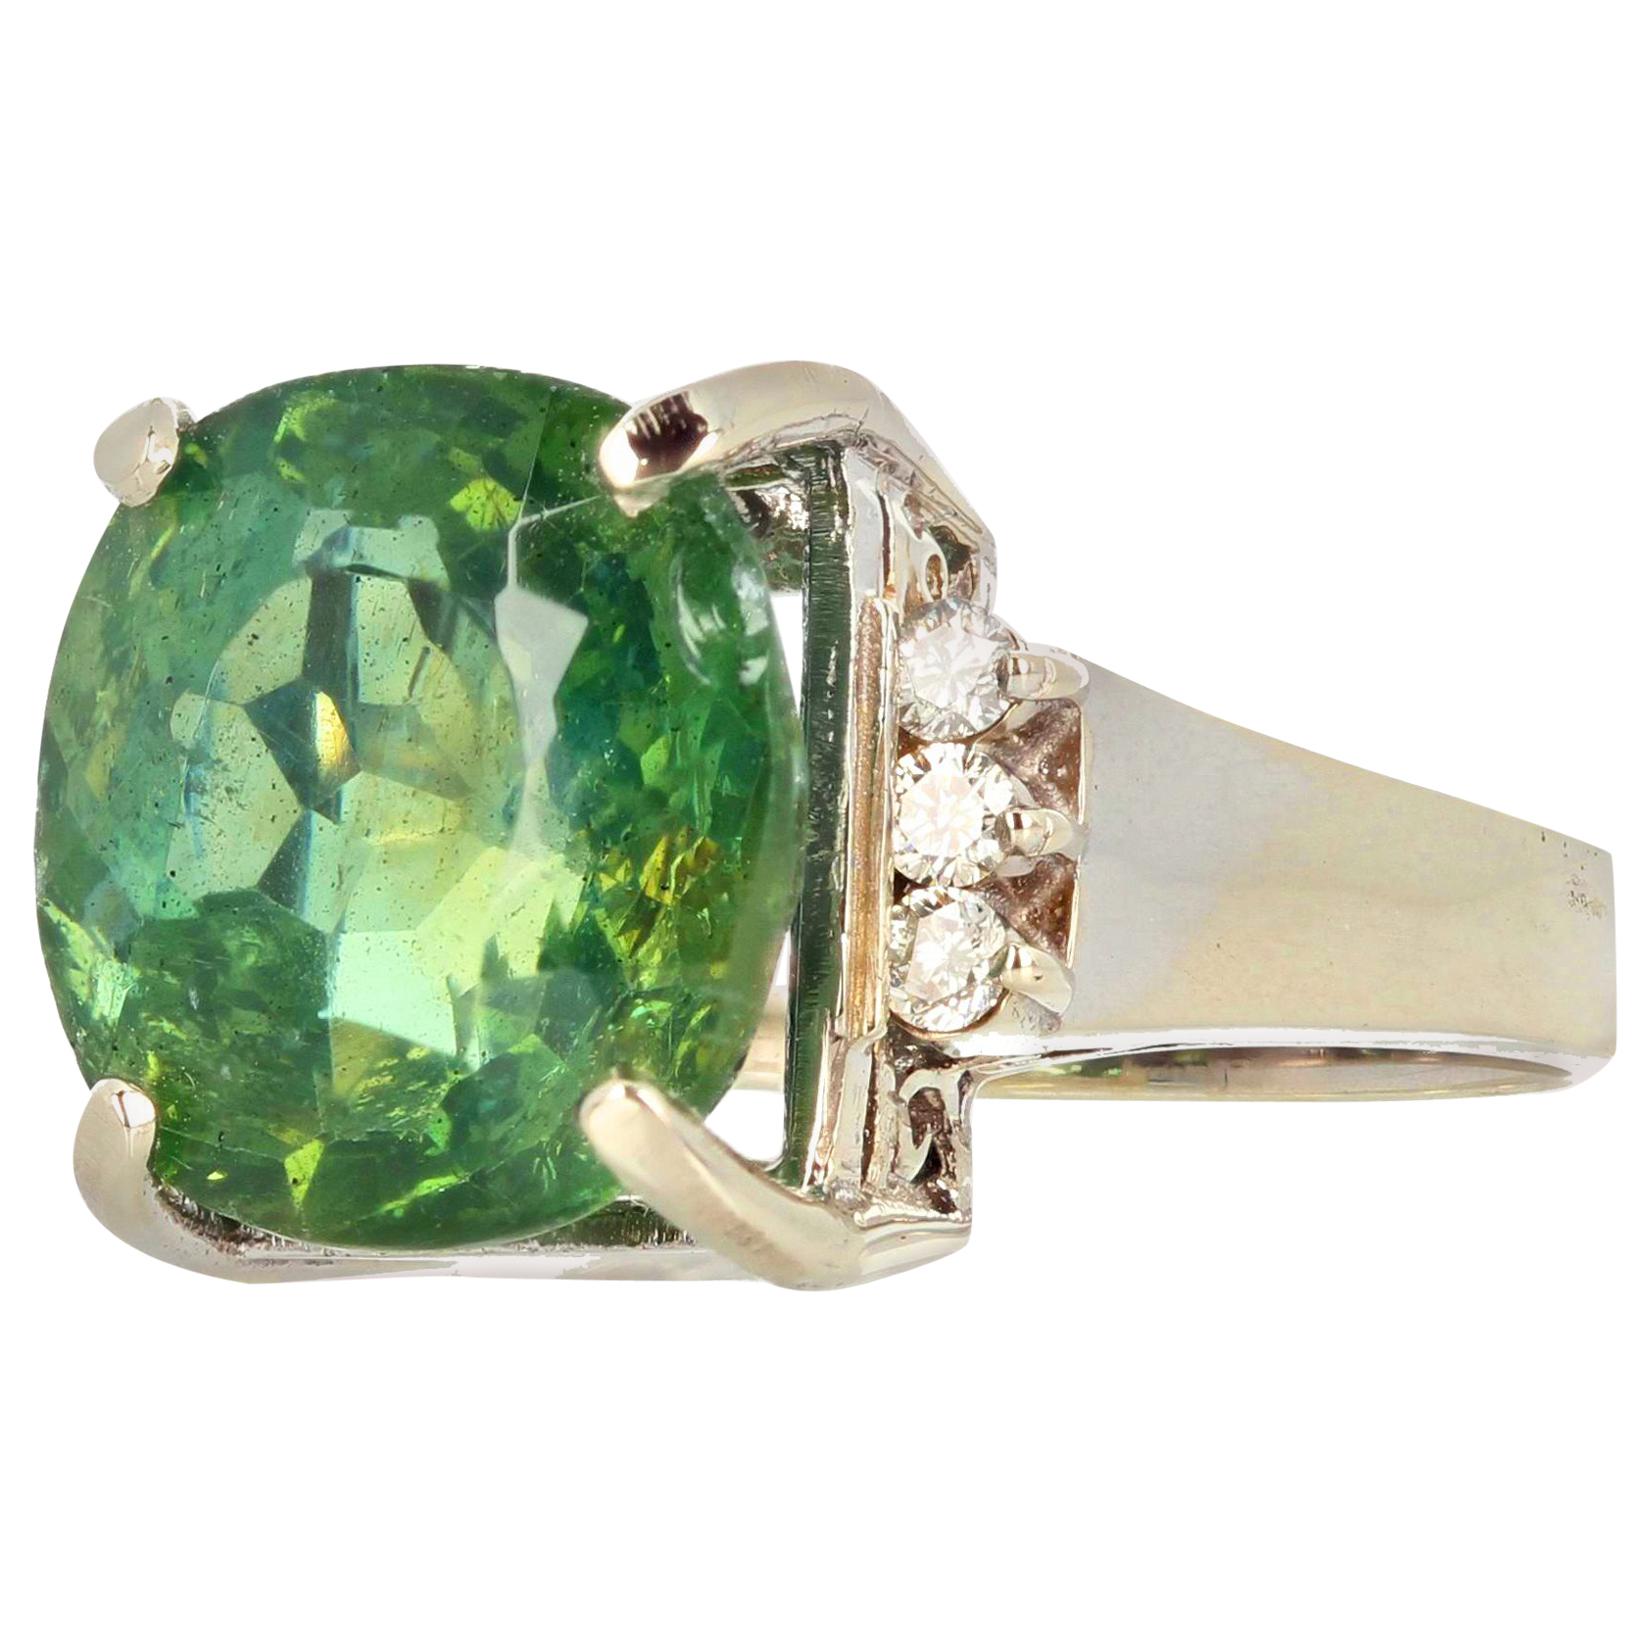 AJD Rare Glittering Green 8 Carat RARE Madagascar Apatite & Diamond Ring In New Condition For Sale In Raleigh, NC